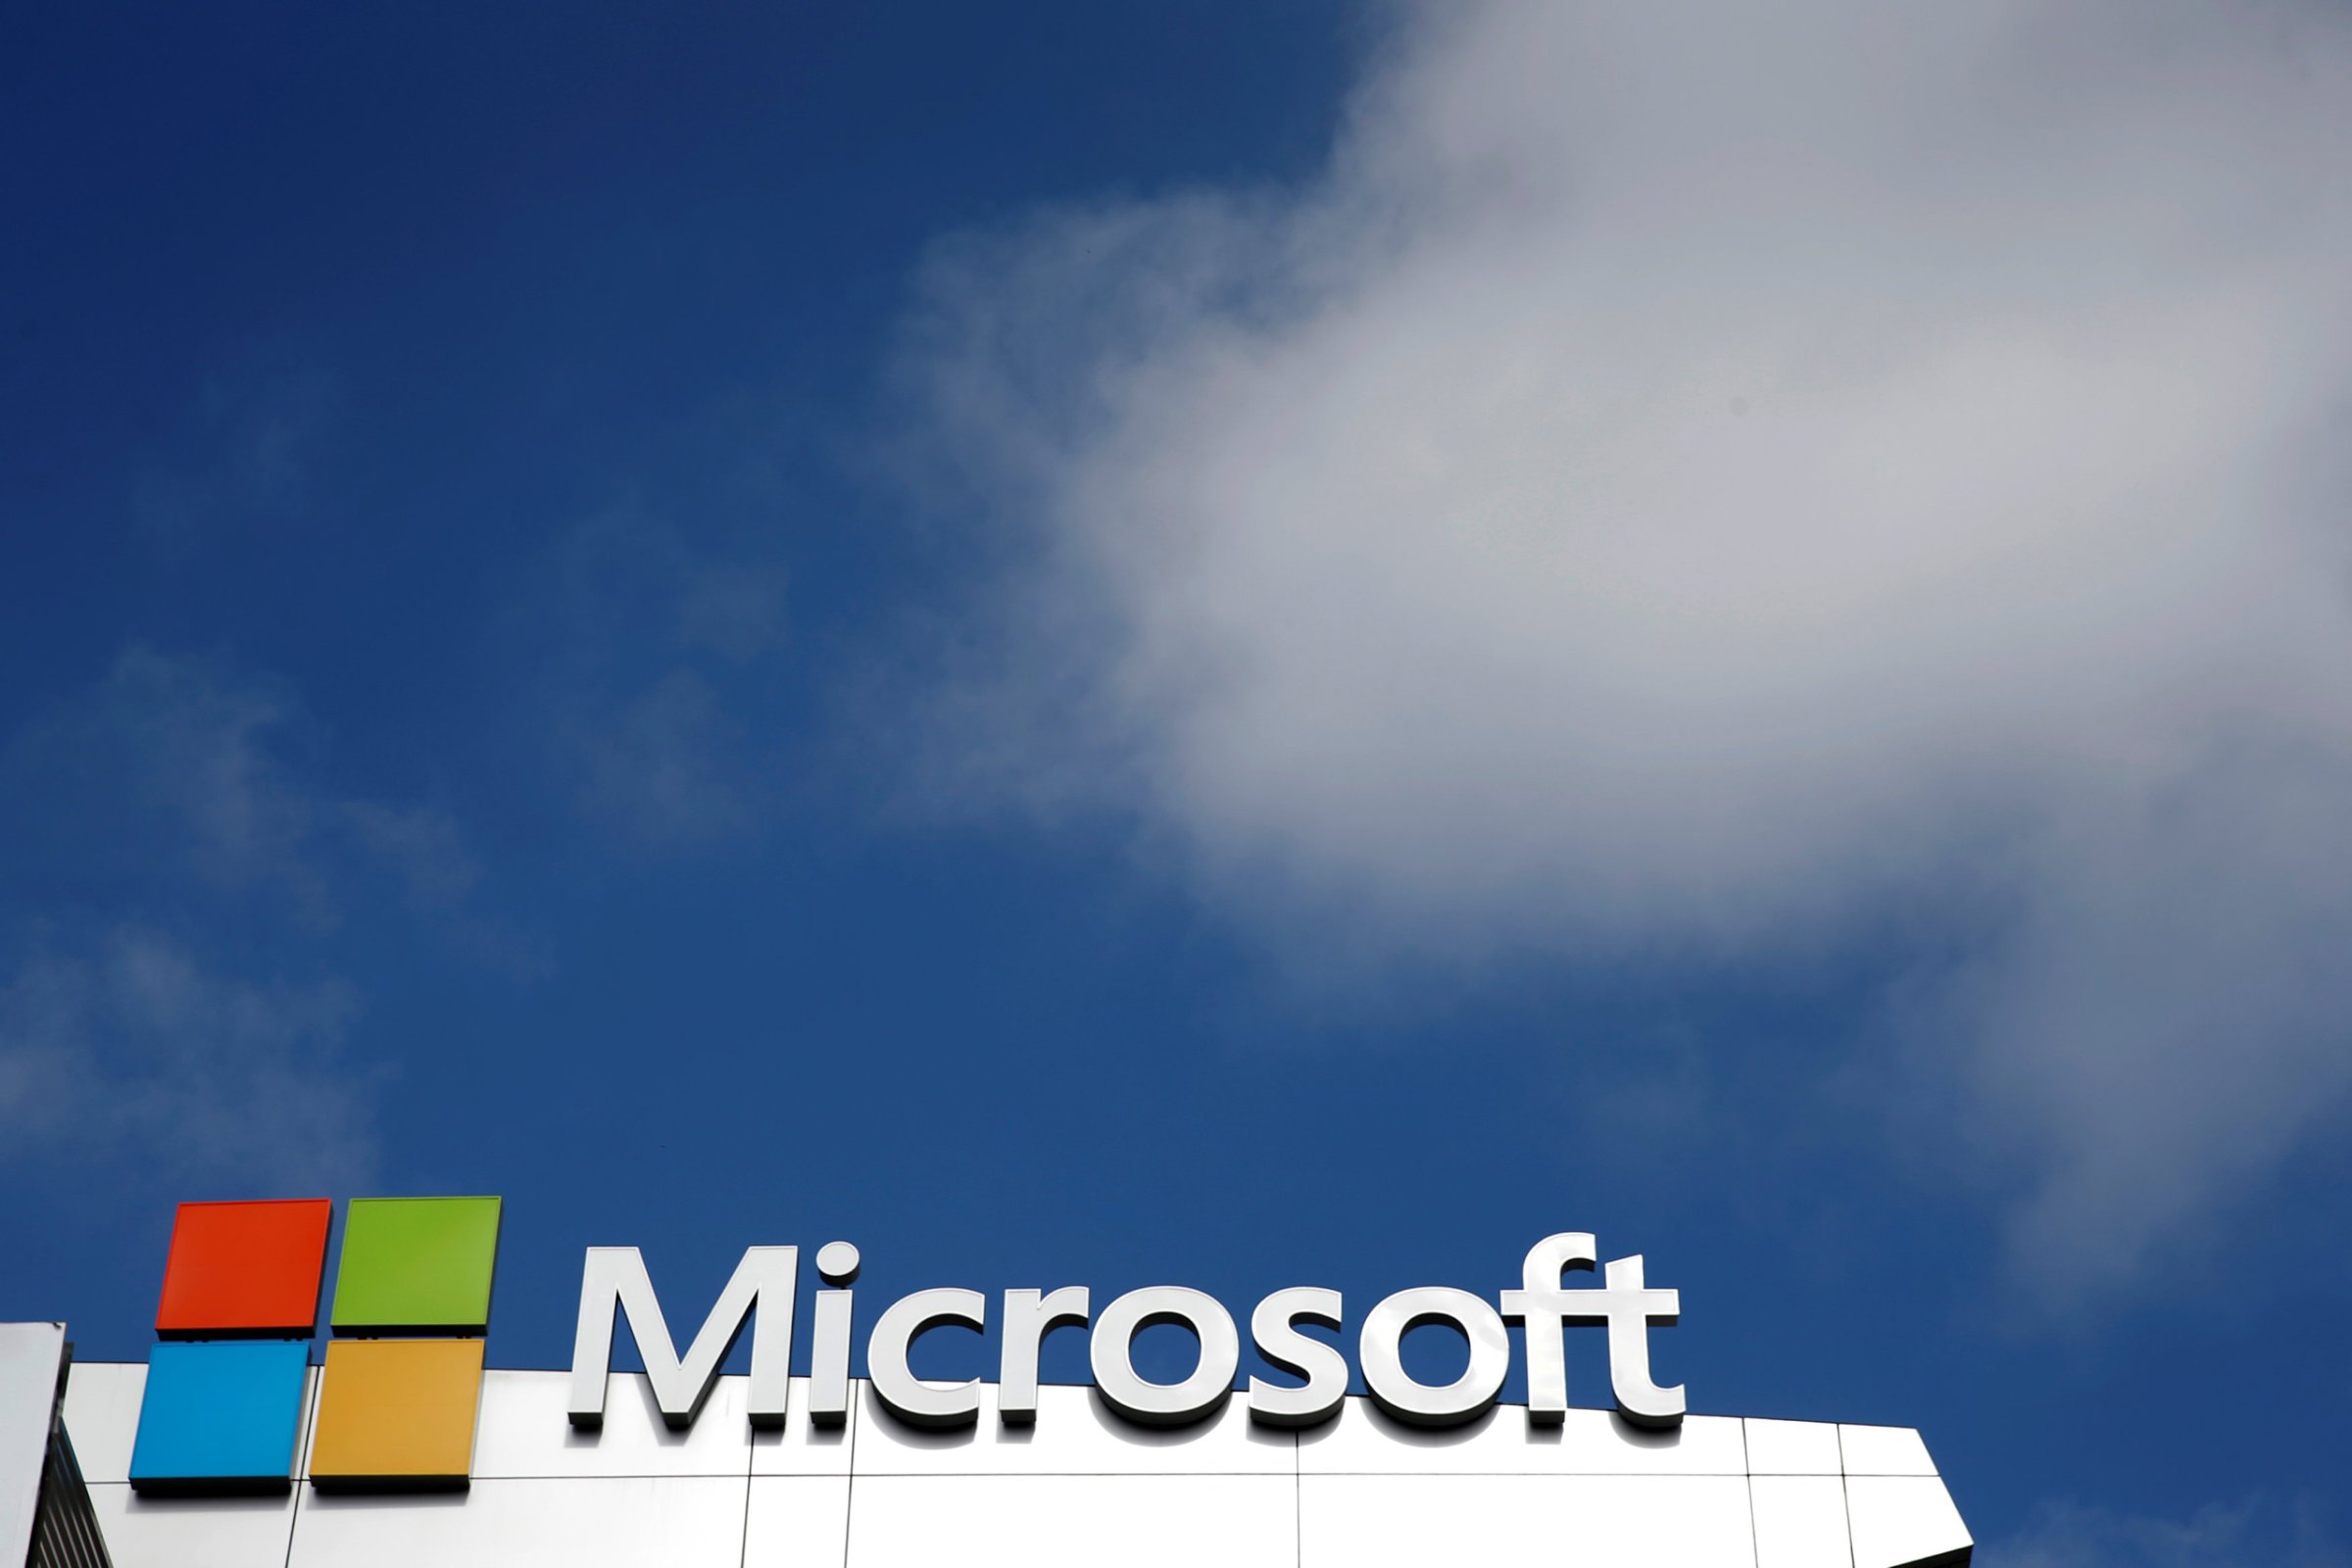 A Microsoft logo is seen next to a cloud the day after Microsoft Corp's $26.2 billion purchase of LinkedIn Corp, in Los Angeles on June 14, 2016.